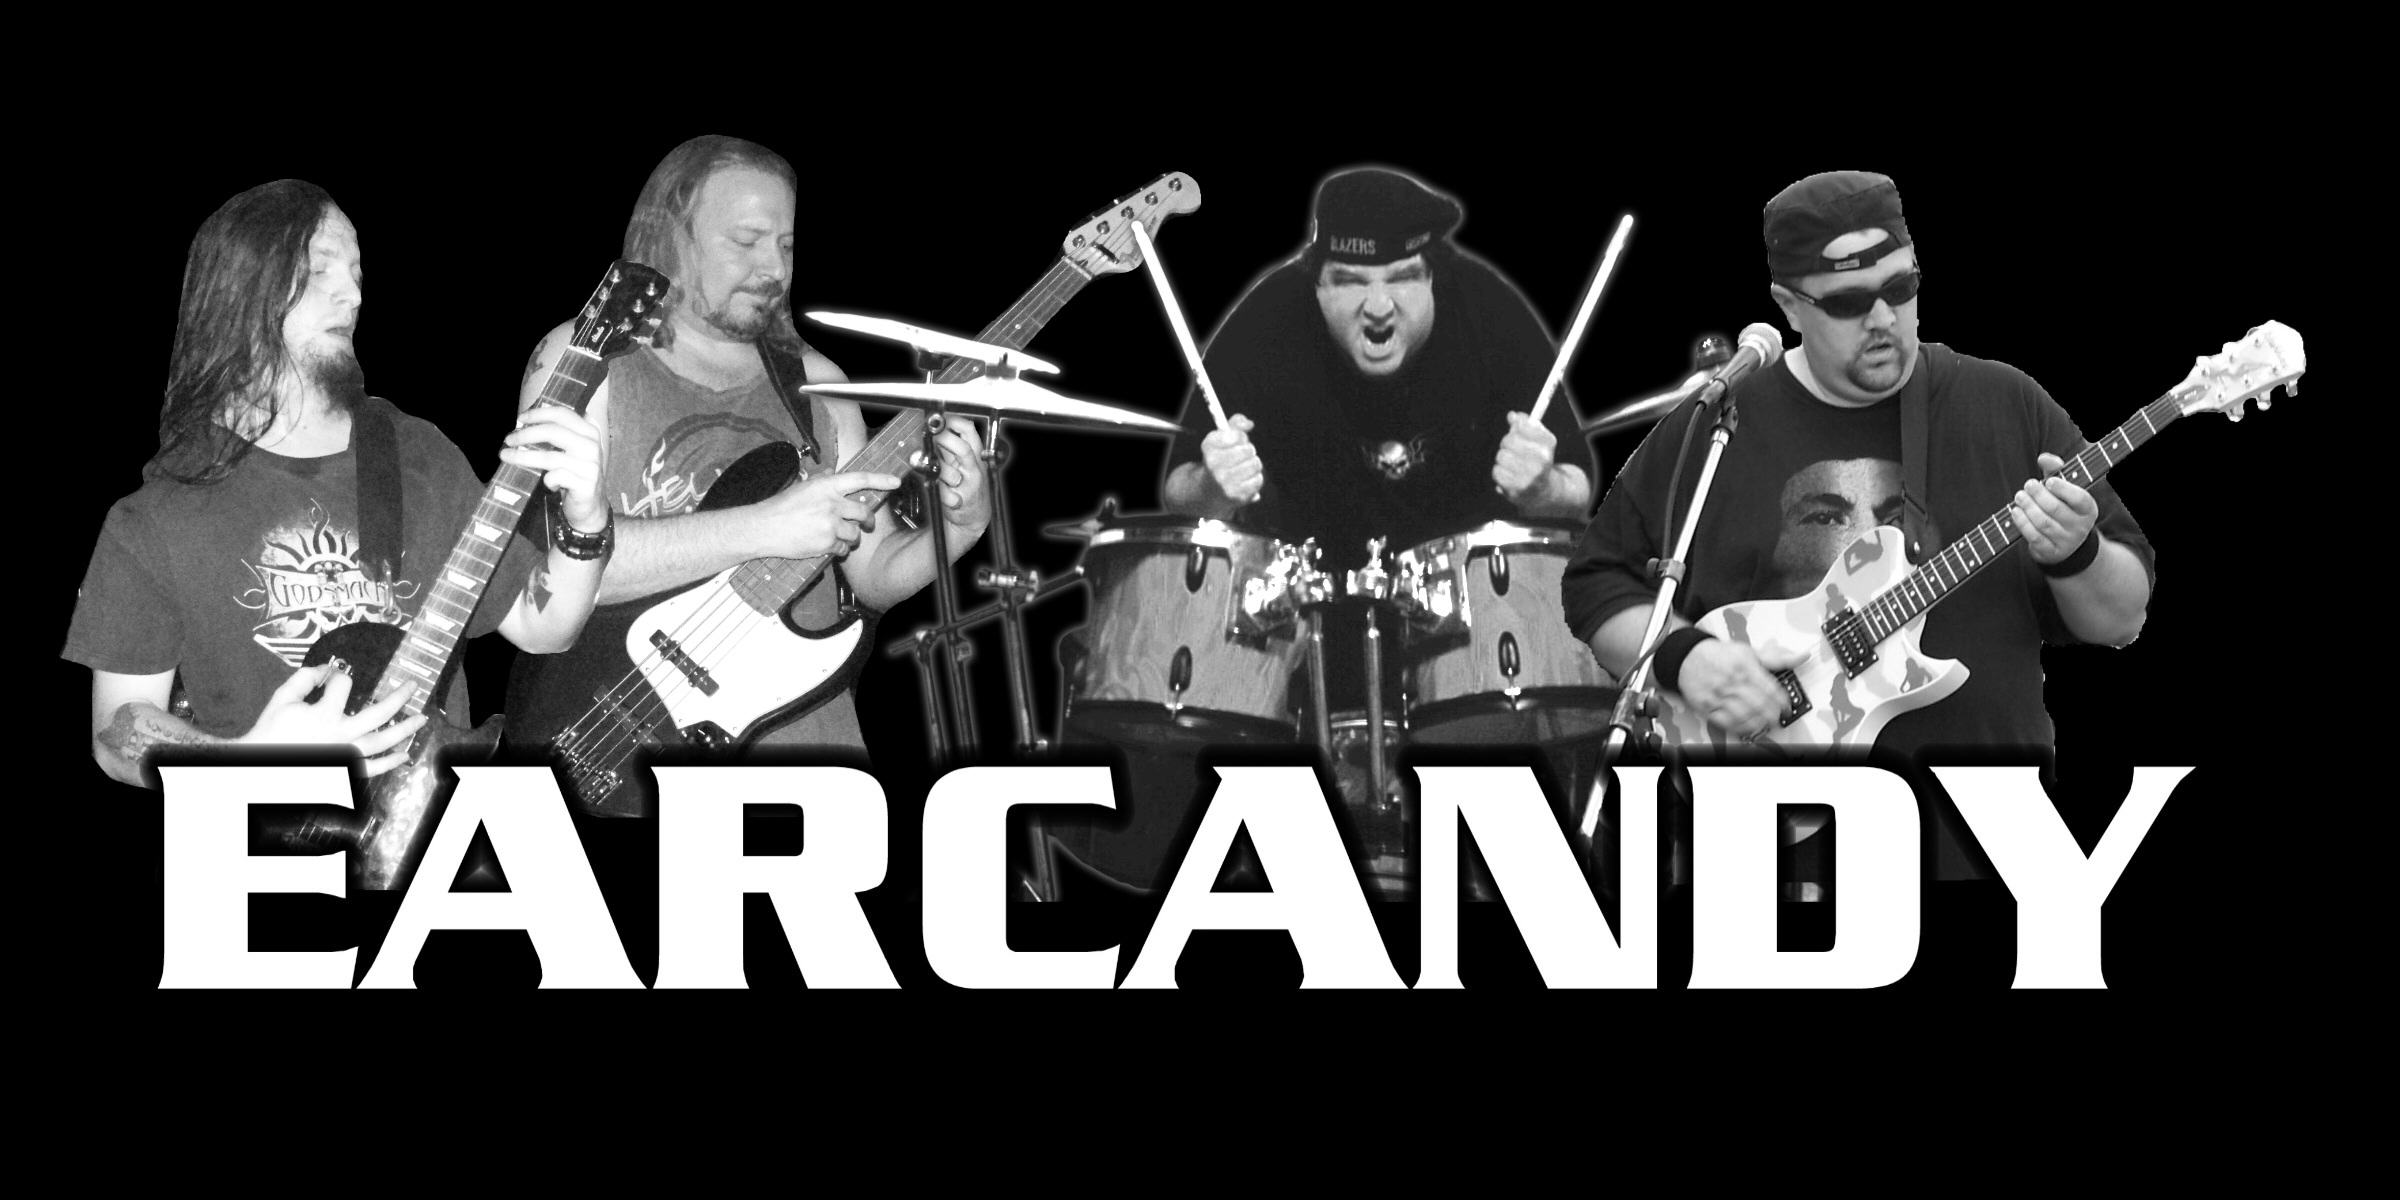 http://indiemusicpeople.com/uploads2/The_Band_EARCANDY_-_EARCANDY_NEW.jpg